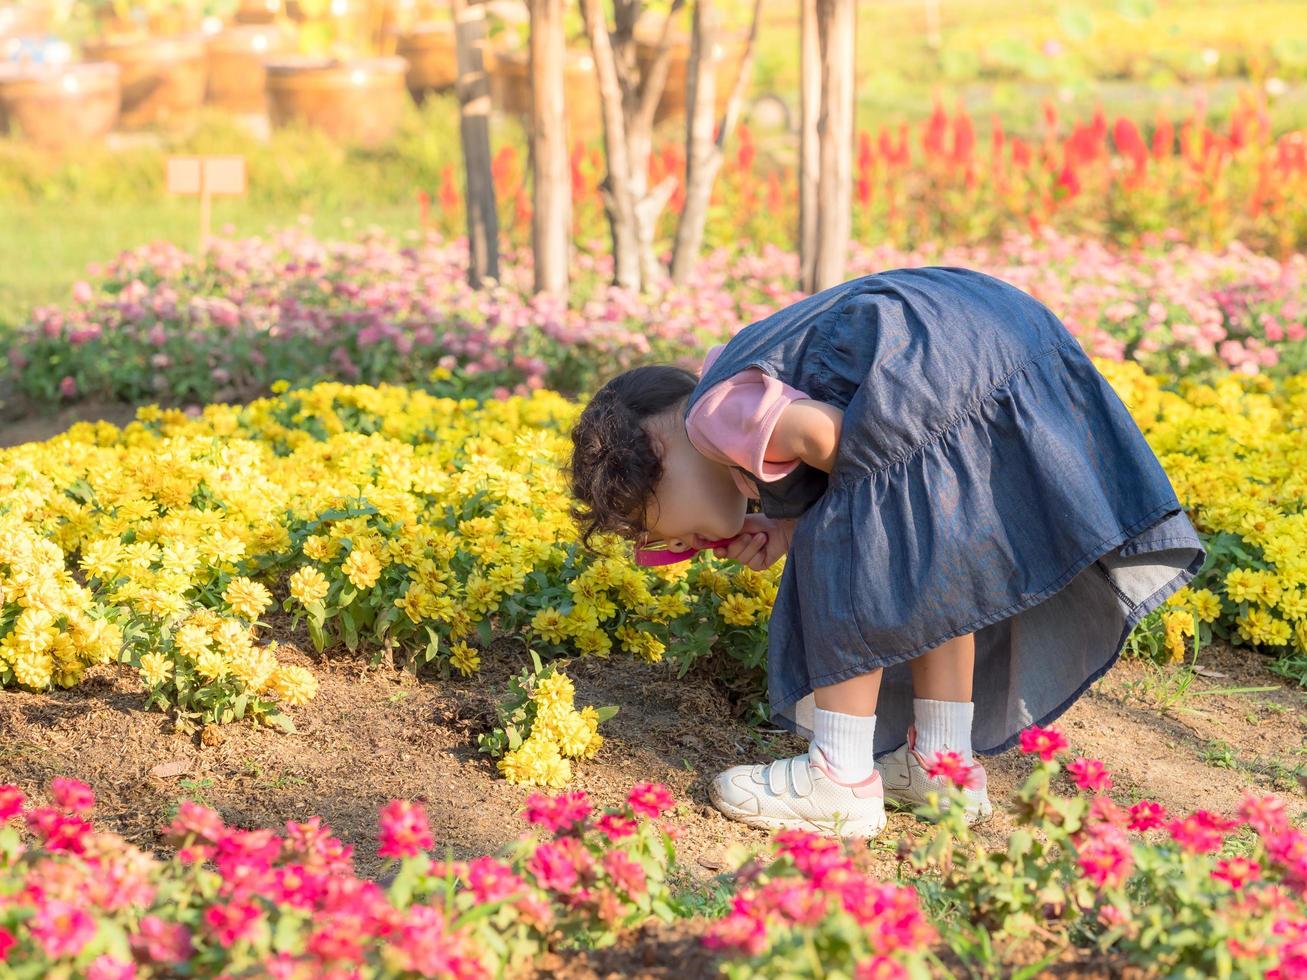 The girl standing  in the field, using a magnifying glass to look at the flowers photo